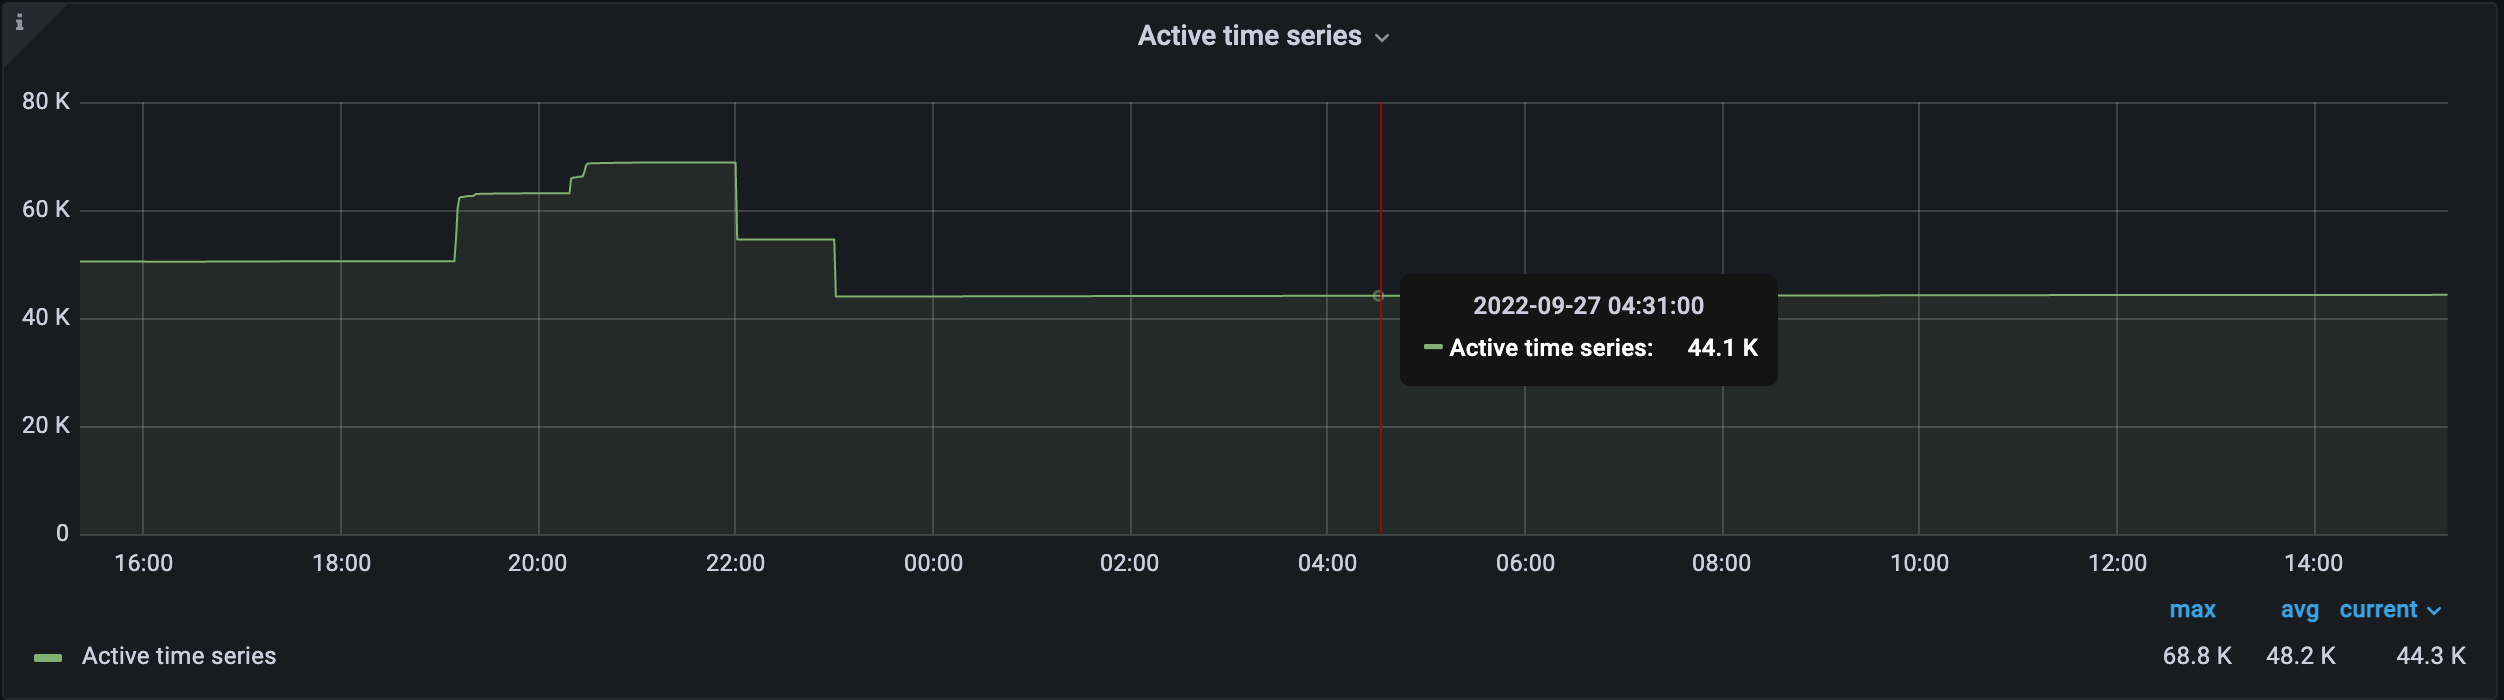 Active time series after applying relabeling config